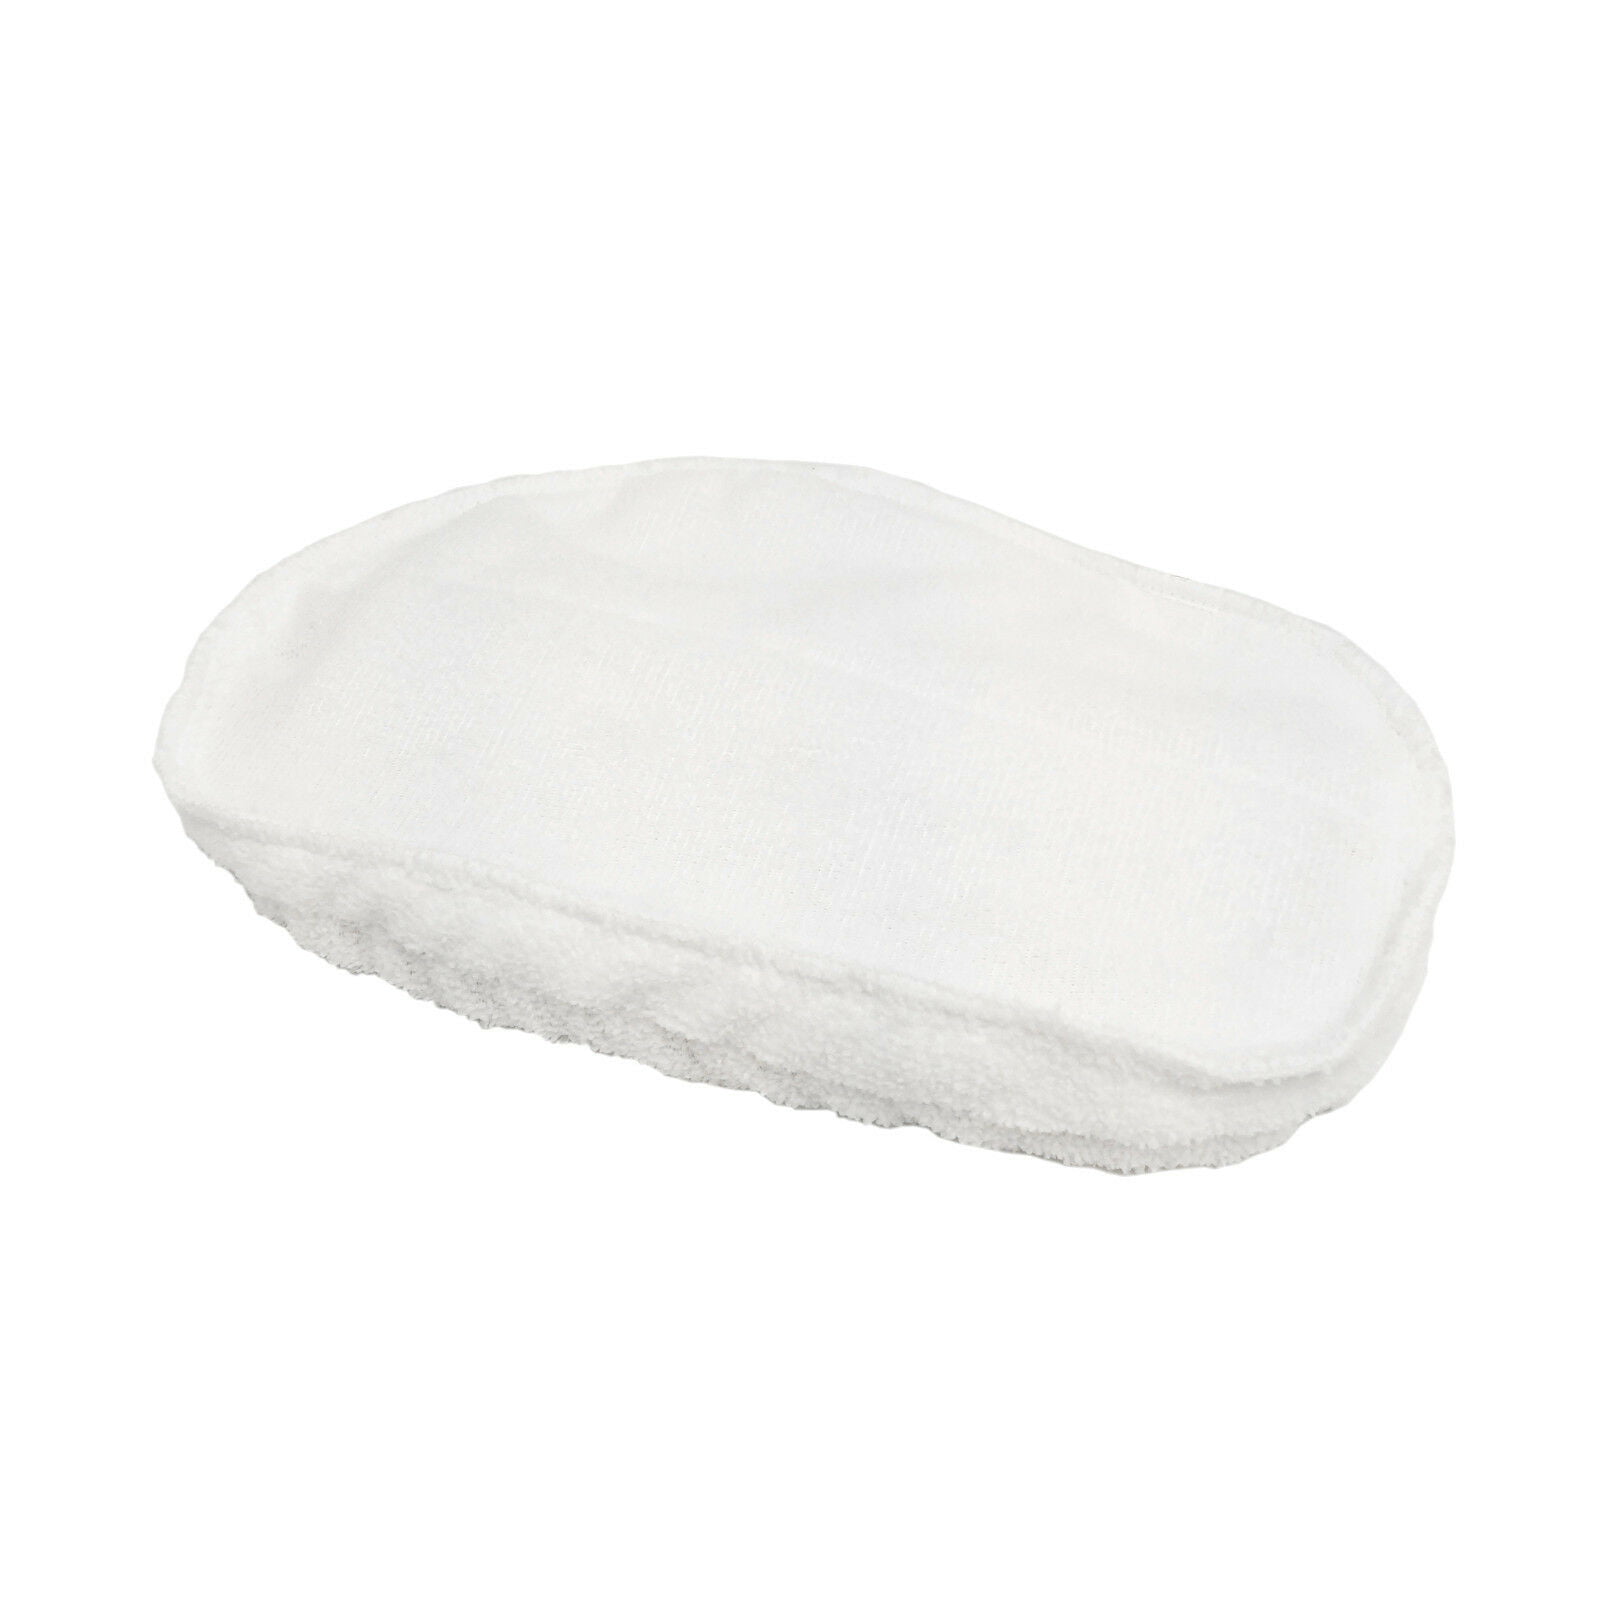 1 Replacement Pad for Bissell Steam Mop Pad 1867 203-2158 3255 Shark Lite Easy 